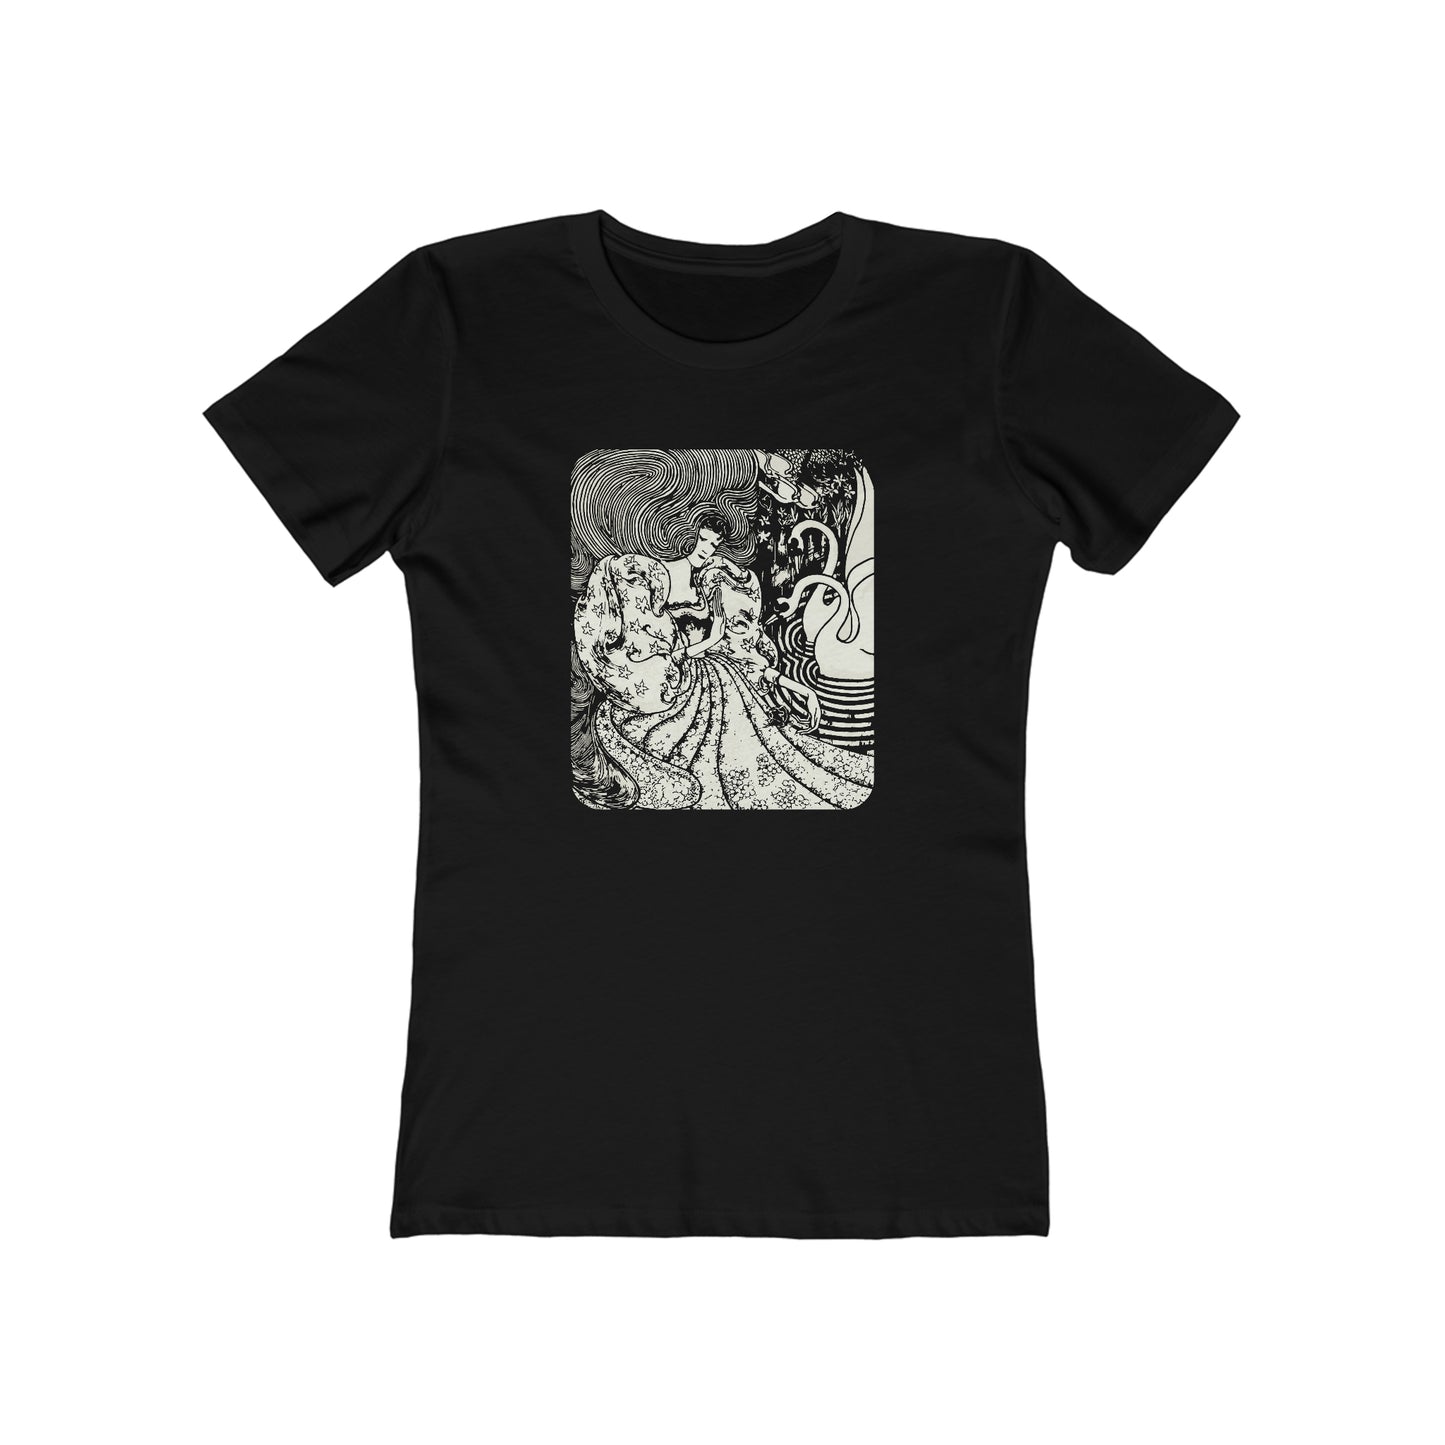 Woman and Swans - Women's T-Shirt